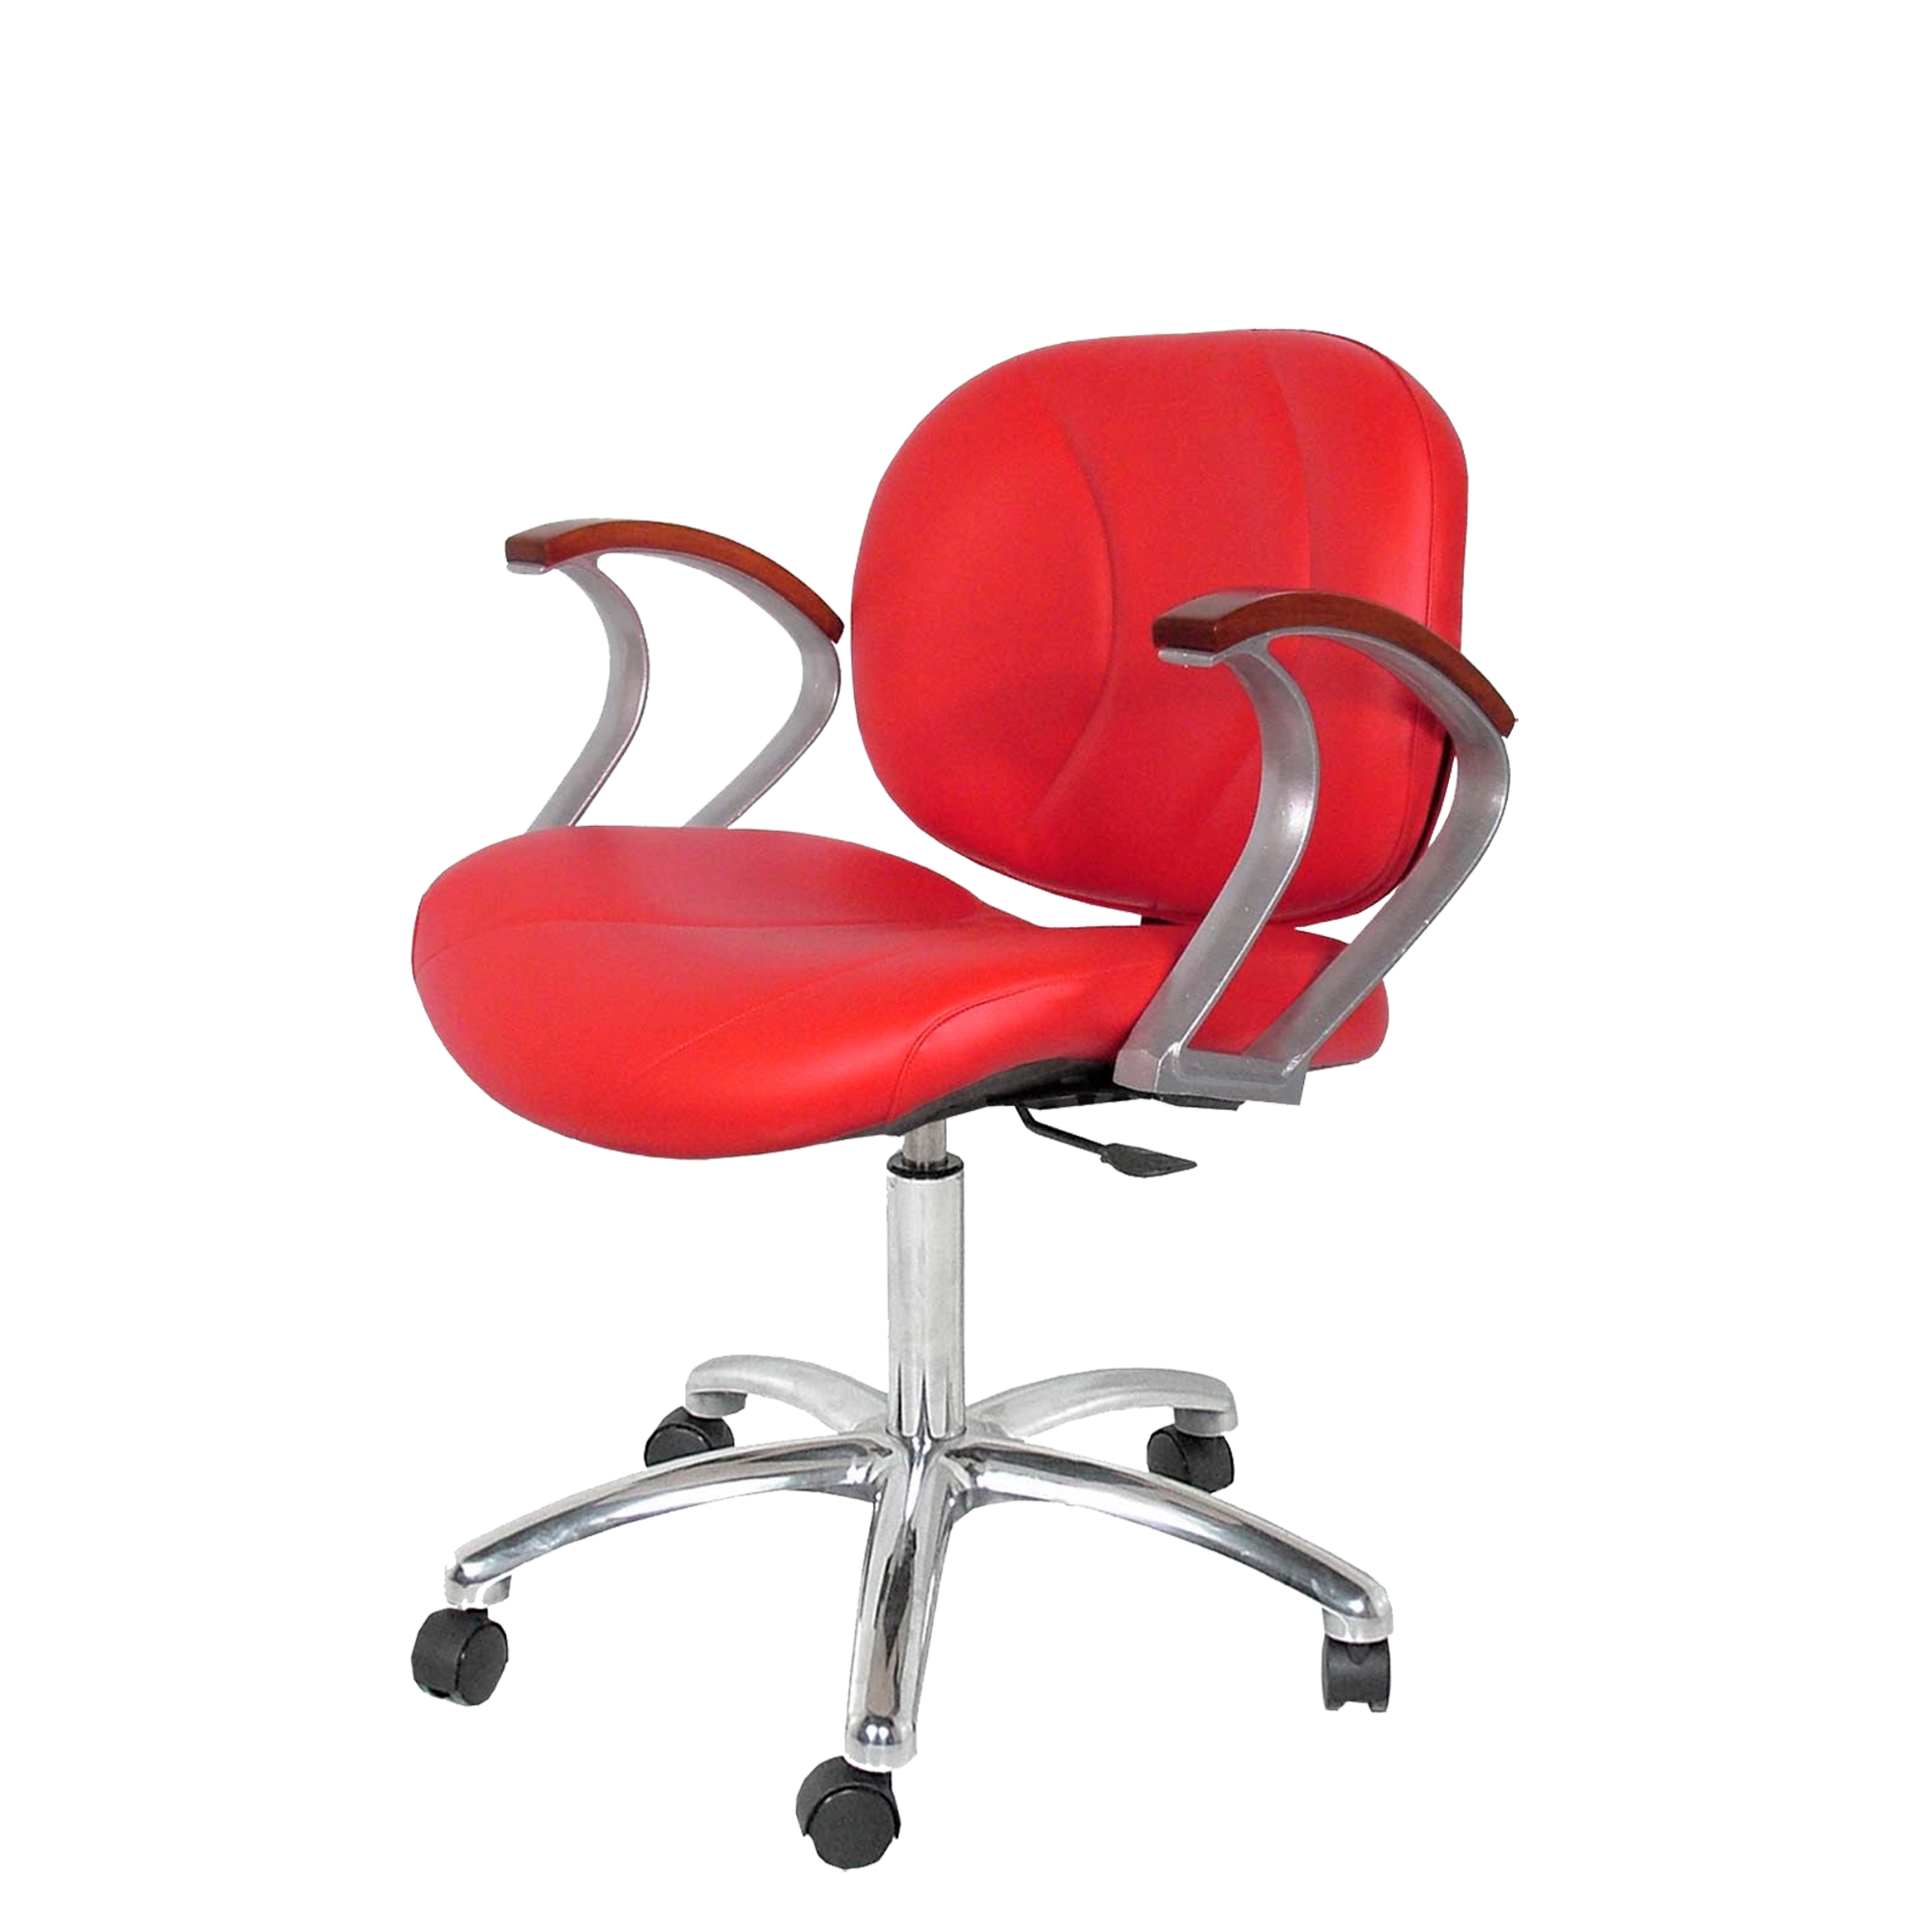 Belize Task Chair